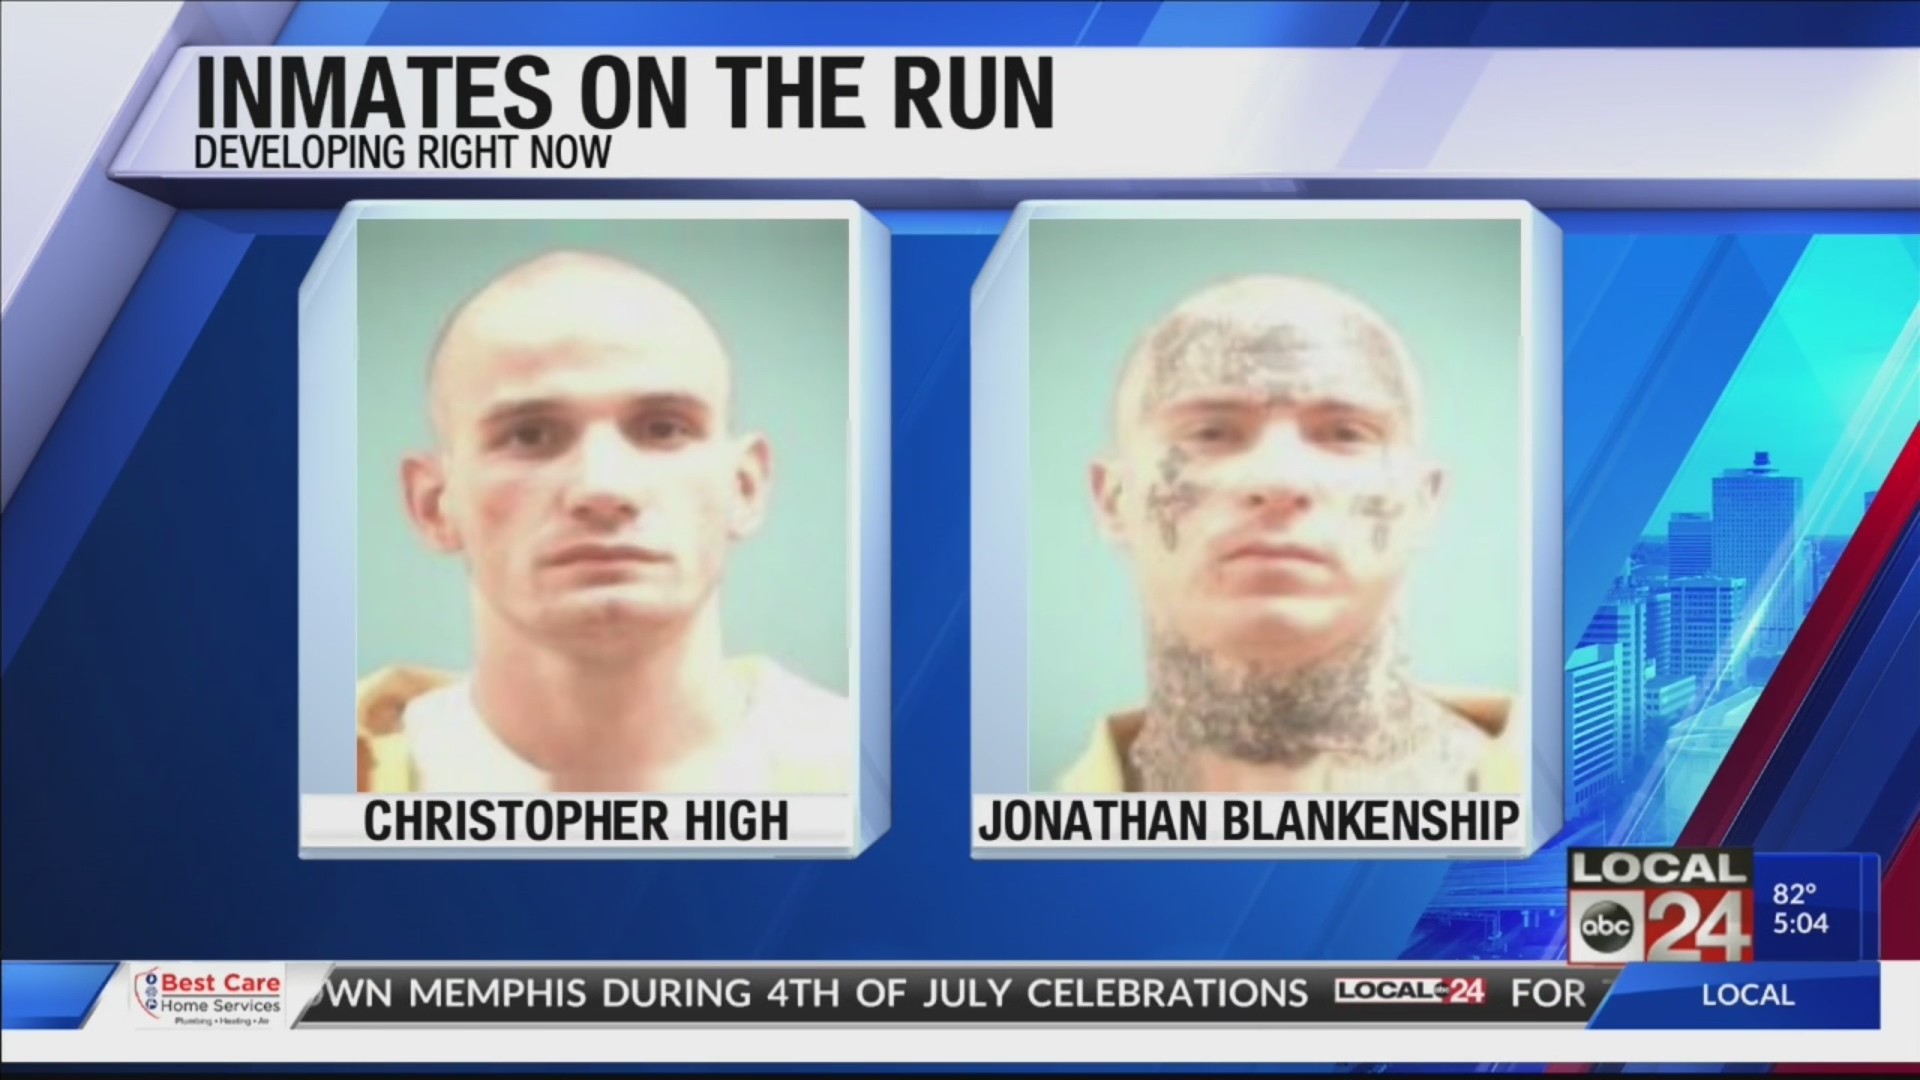 Over $12,000 reward for information that helps investigators find two escaped inmates